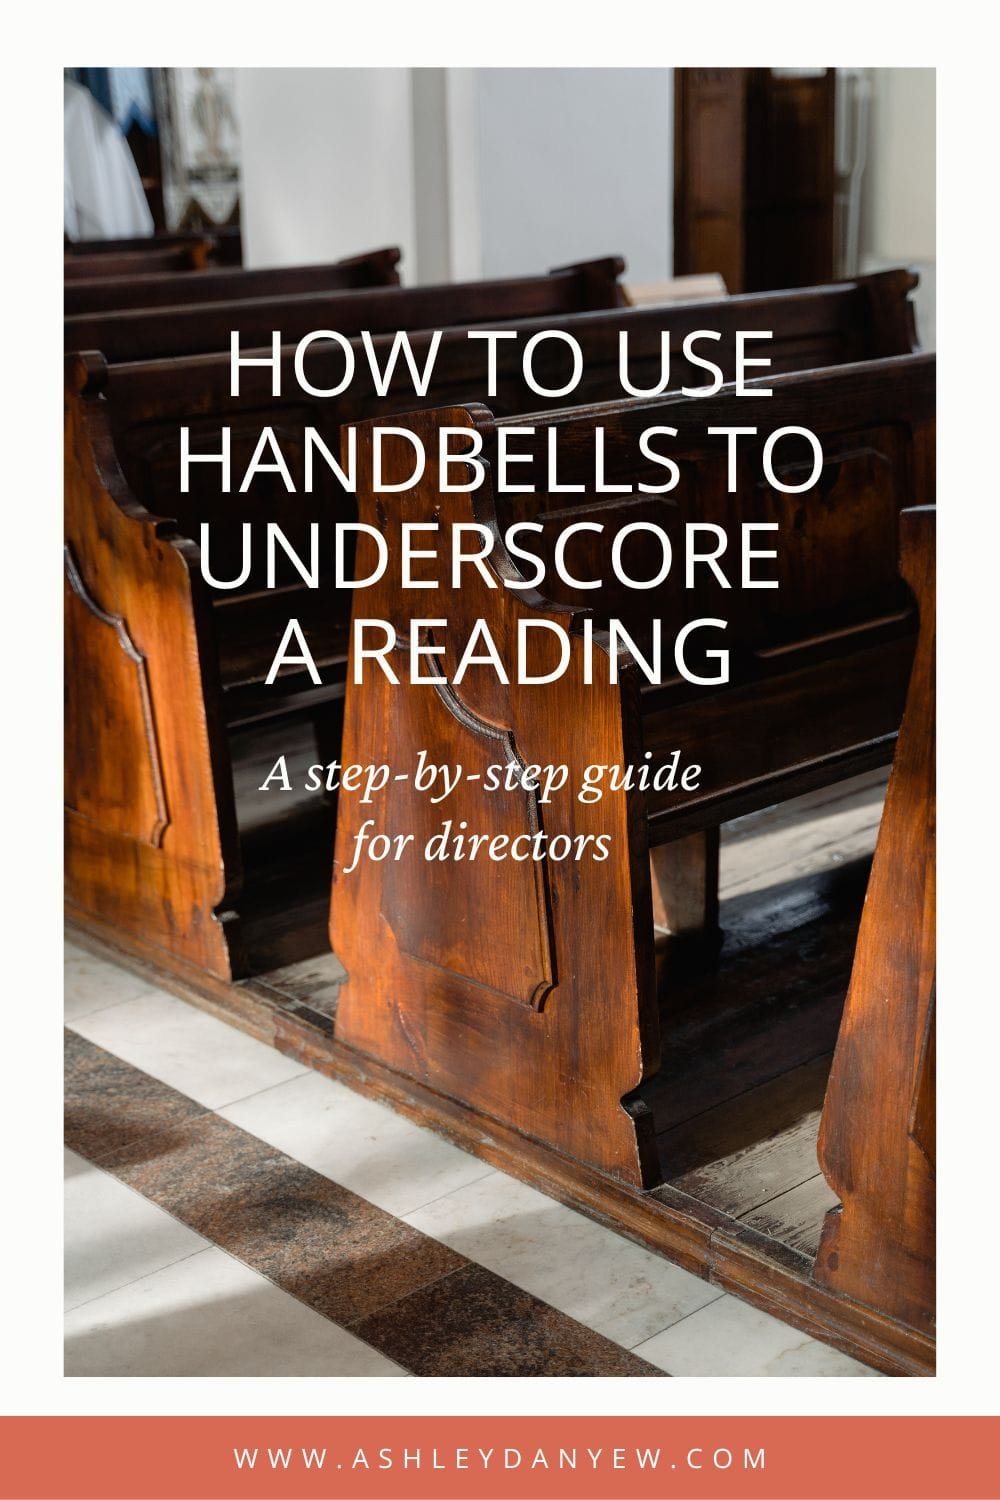 How to Use Handbells to Underscore a Reading